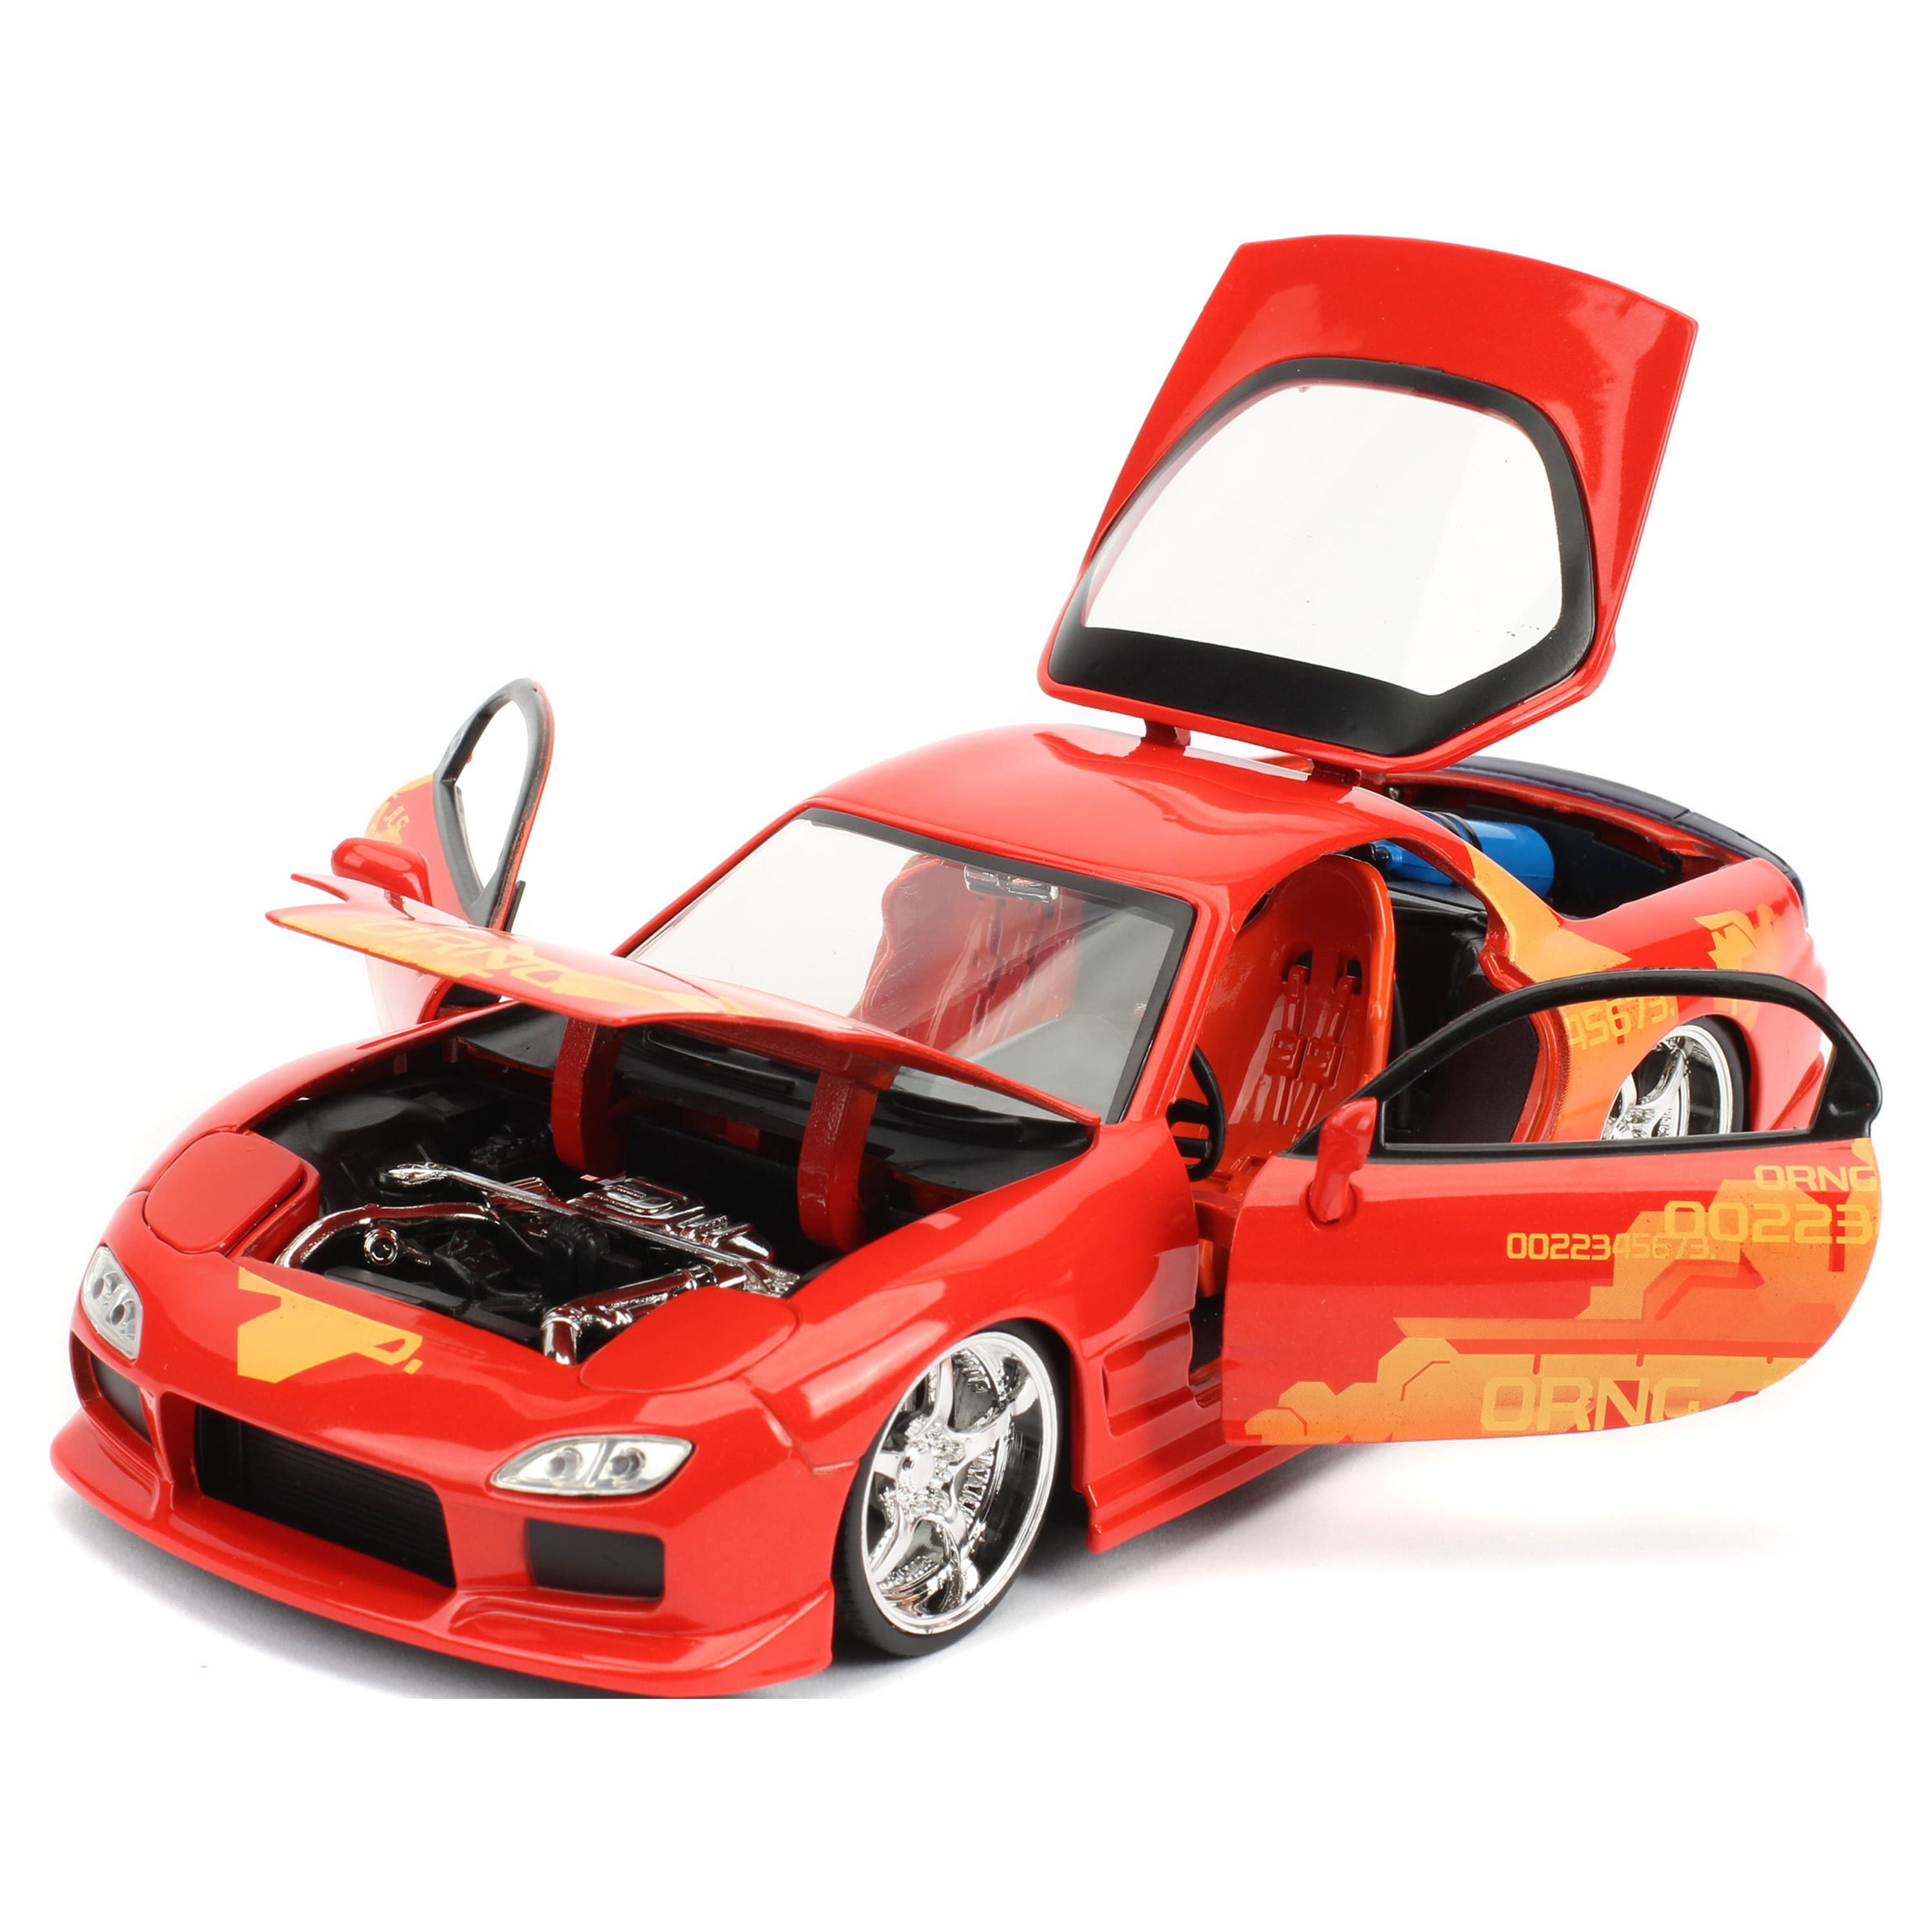 Buy Jada Toys Fast & Furious 1:24 1995 Mazda RX-7 Widebody Die-cast Car  w/Han's 2.75 Die-cast Figure, Toys for Kids and Adults Online at Low  Prices in India - .in